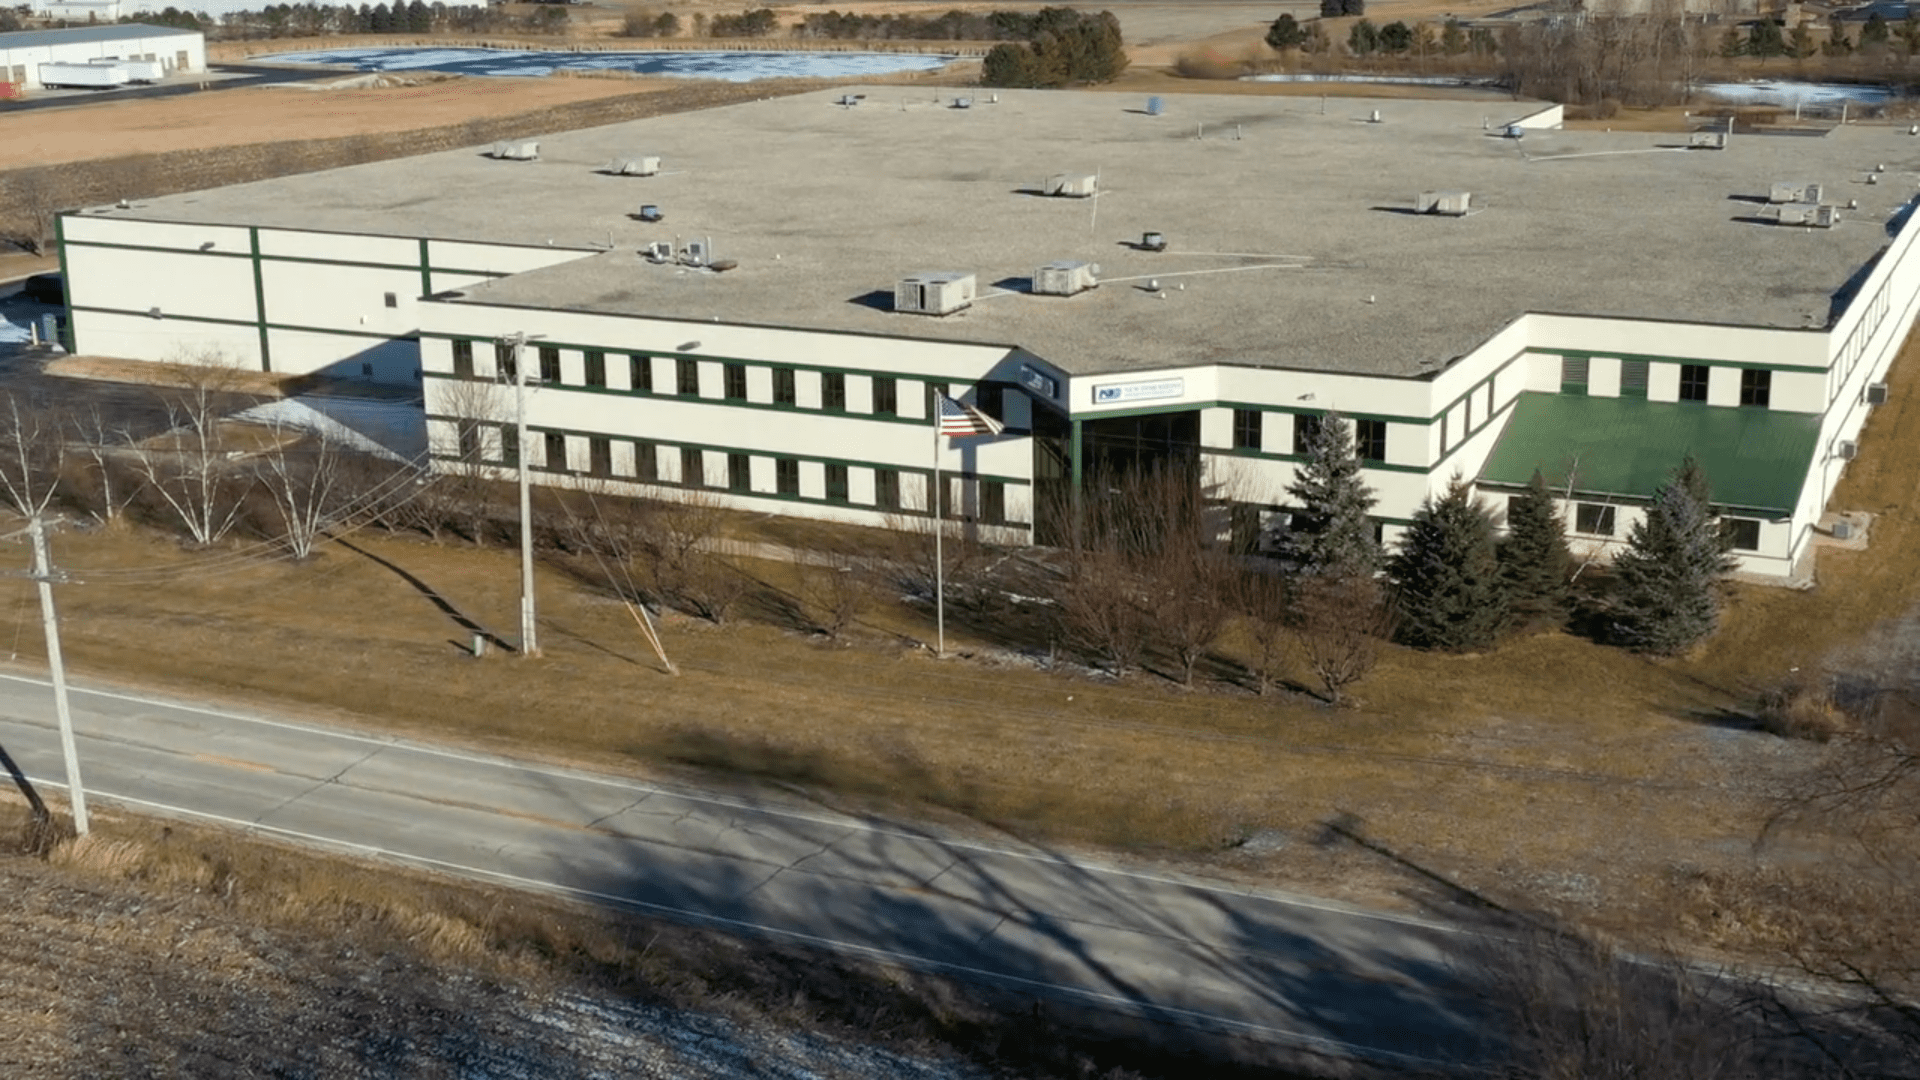 140,000 SQ. FT. Manufacturing Facility located in Union, Illinois